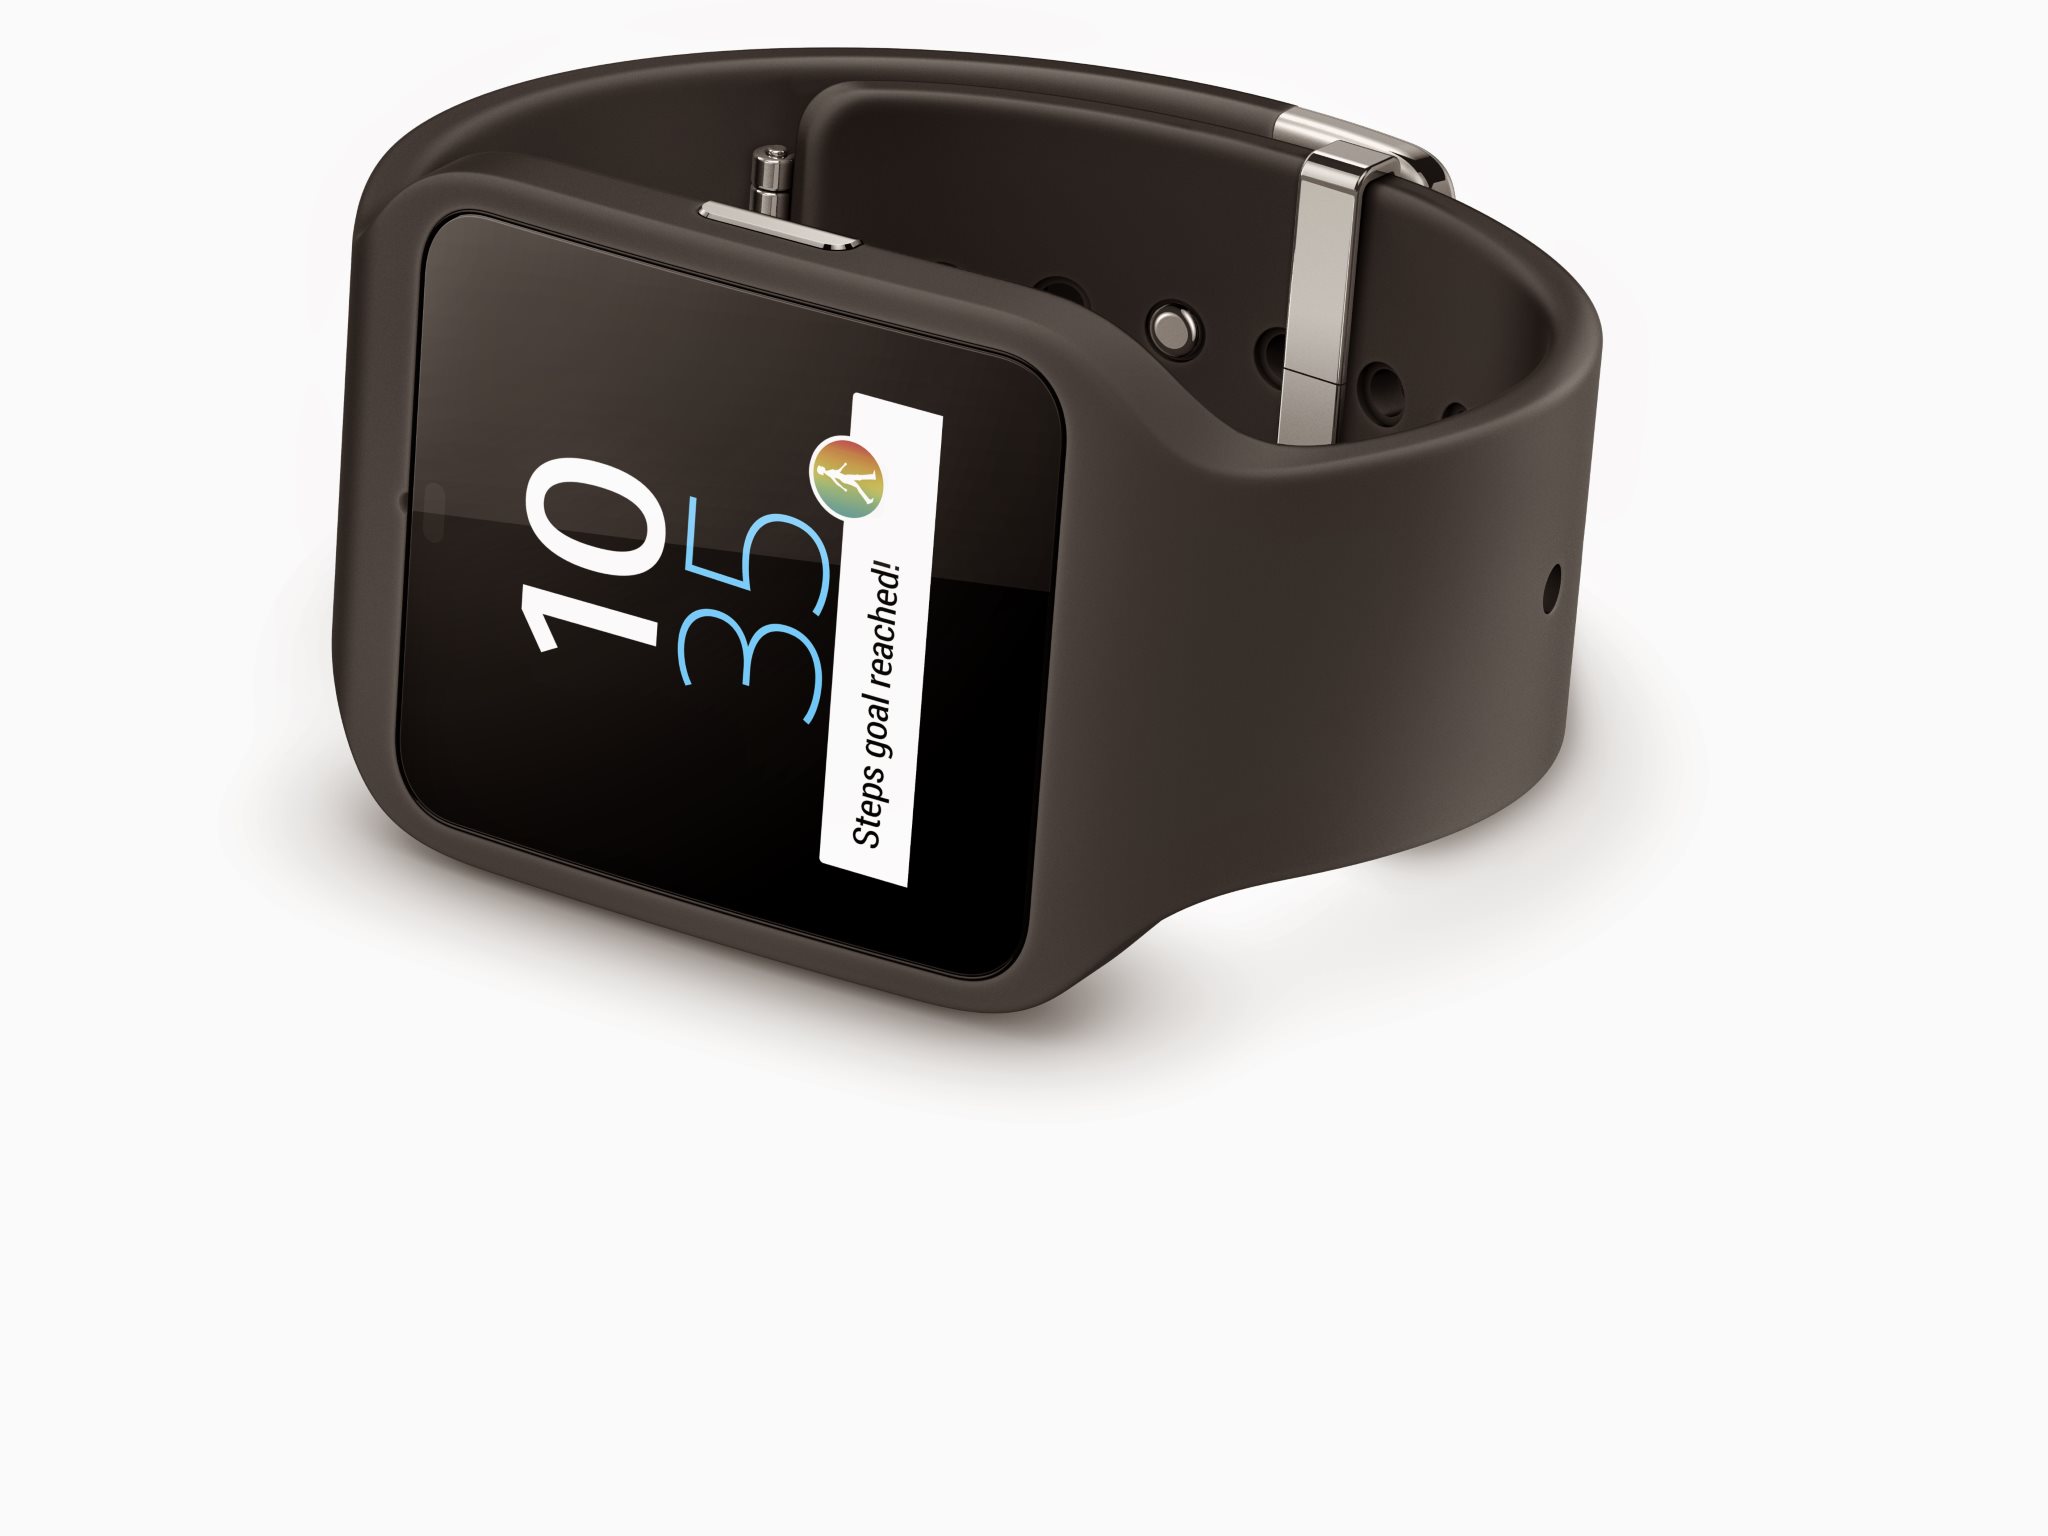 Sony Smartwatch 3 And Smartband Talk Wallpaper - Smartwatch Made By Google - HD Wallpaper 